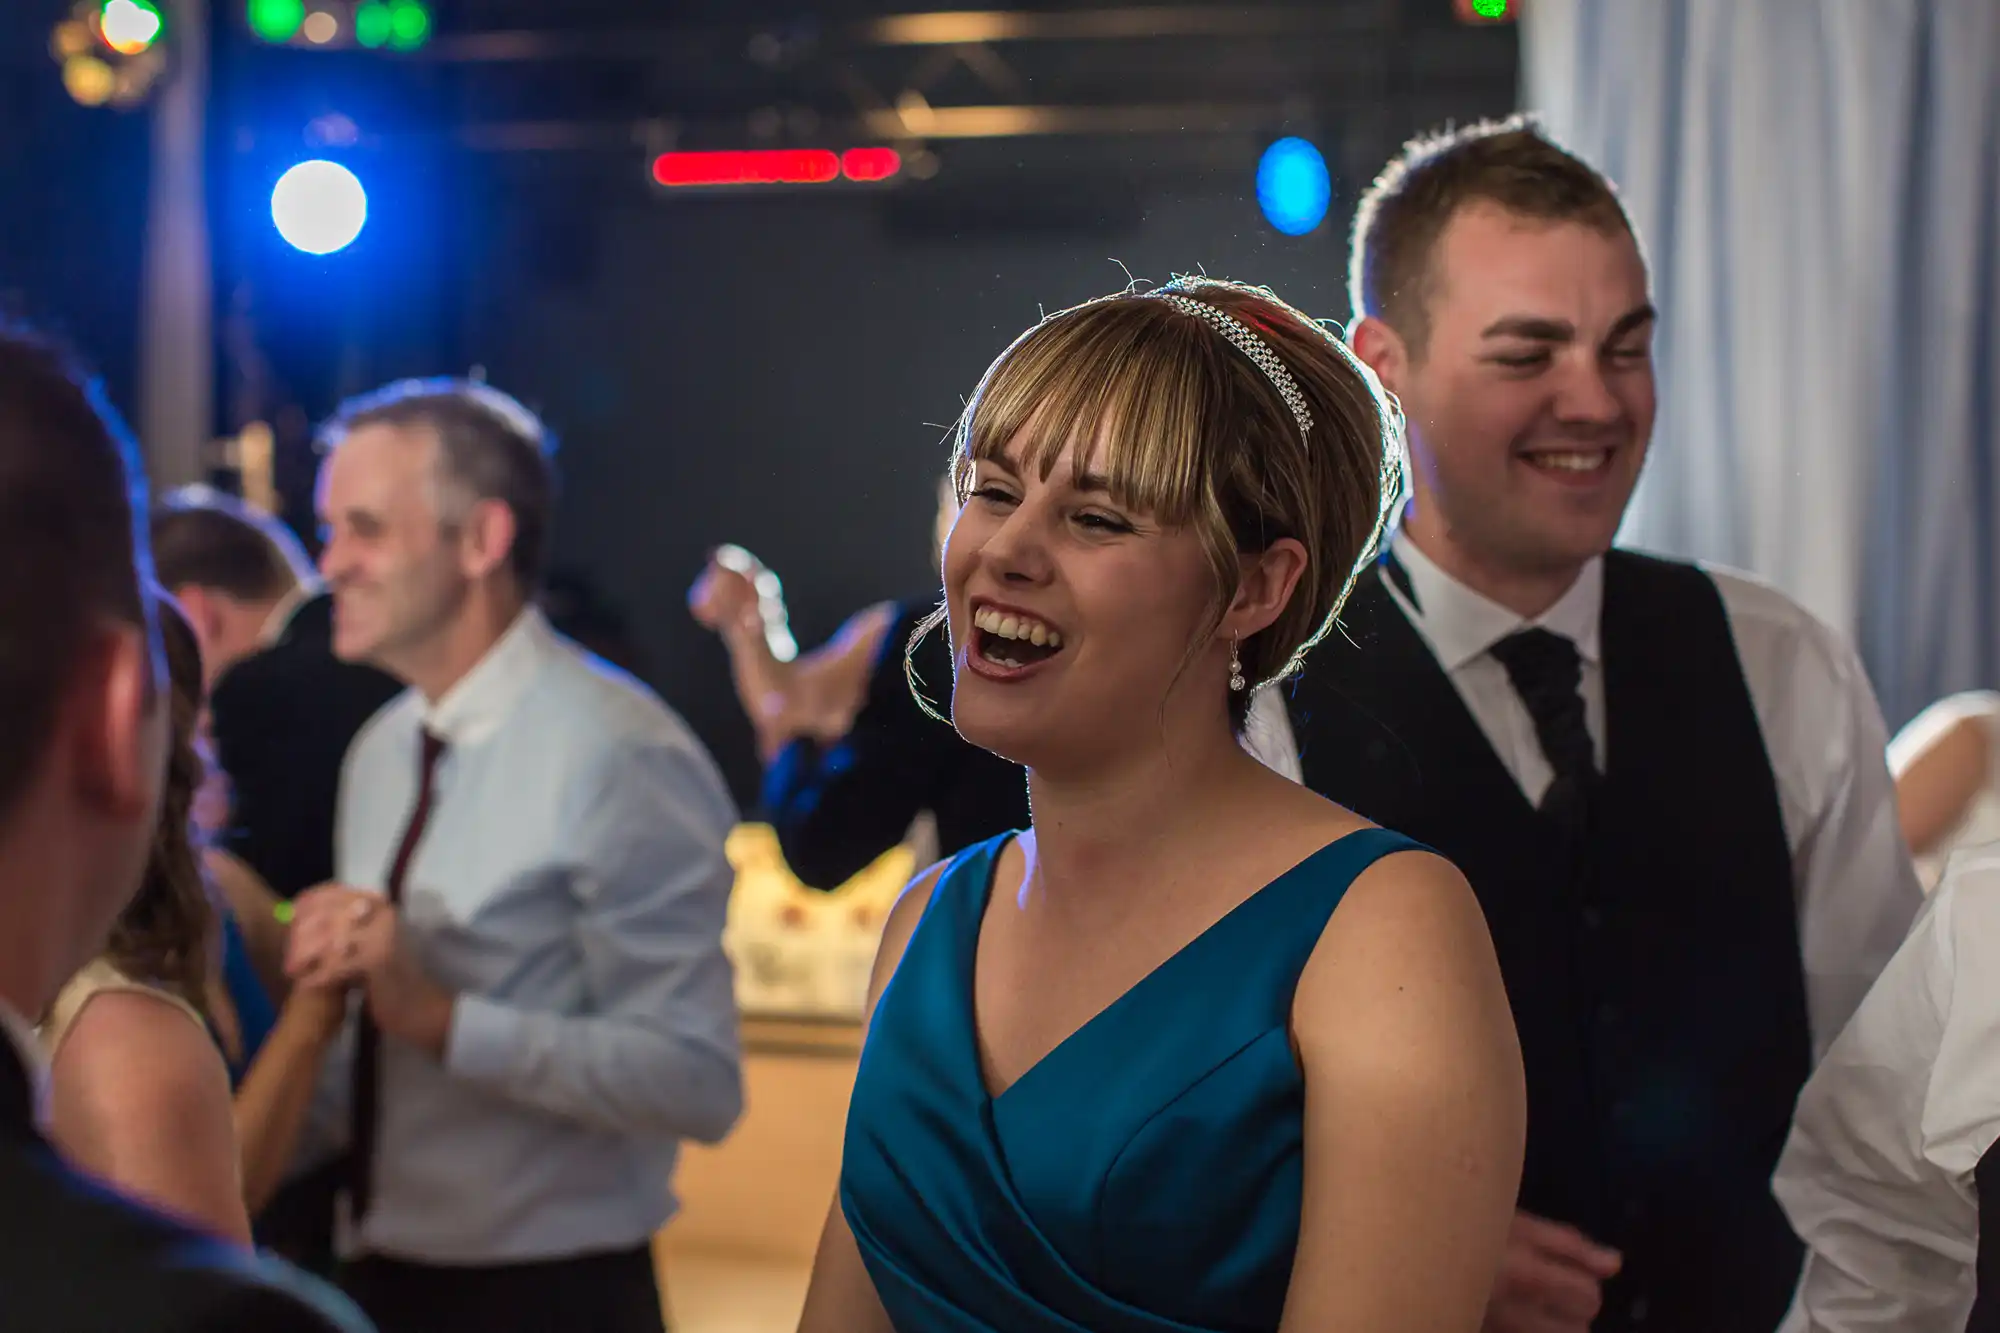 A joyful woman in a blue dress laughs while dancing at a lively party with people in the background.